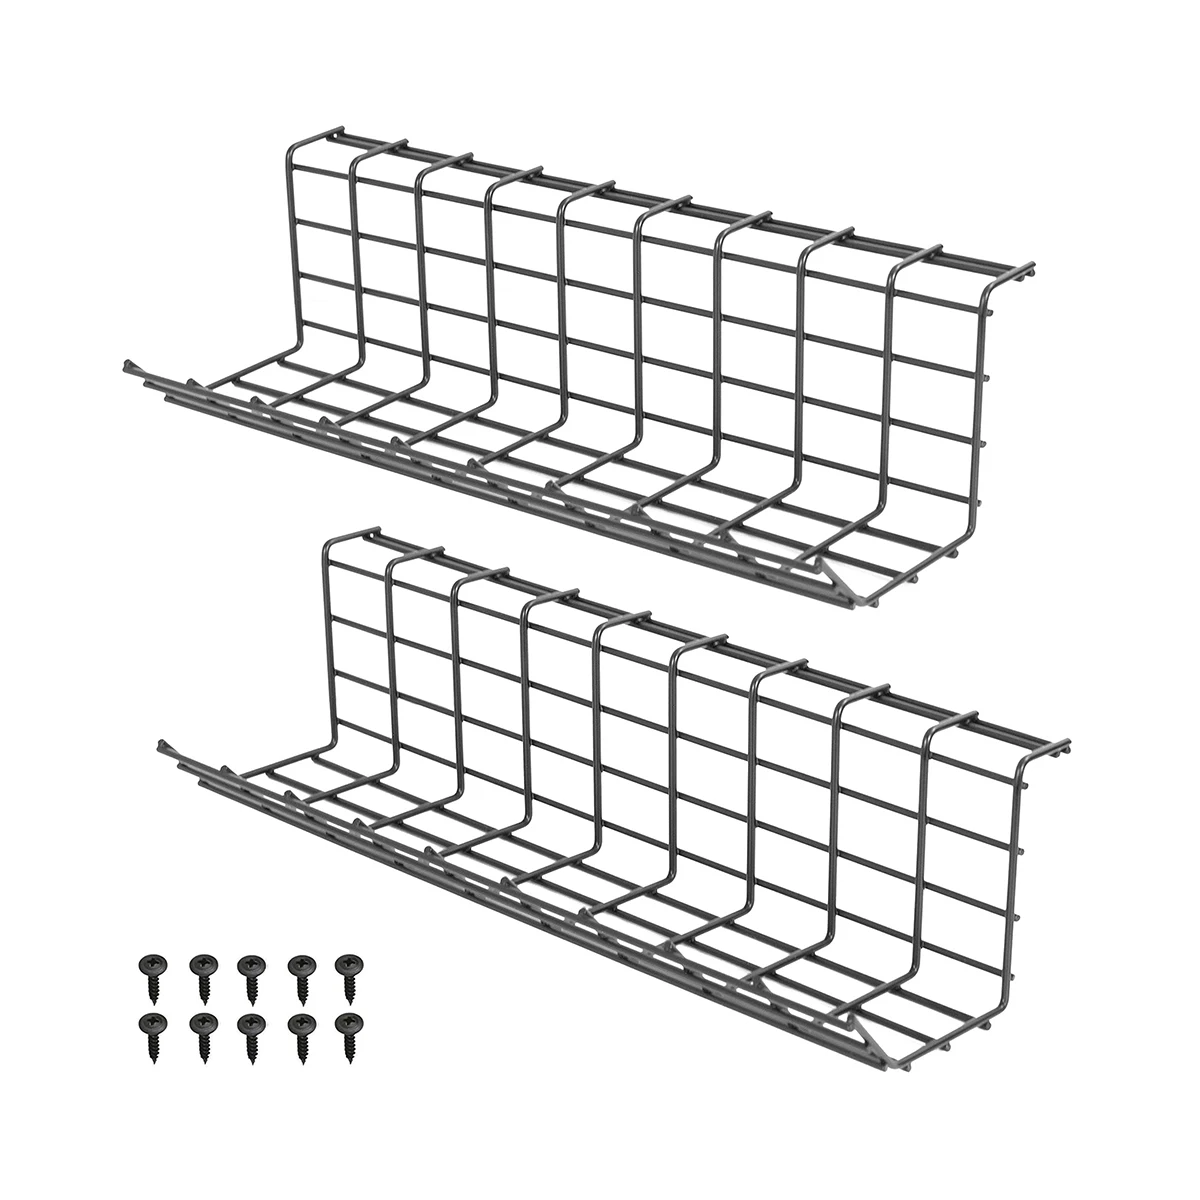 High Qualify Supply Steel Cable Tray Organize Metal Wire Under Desk Cable Management Tray